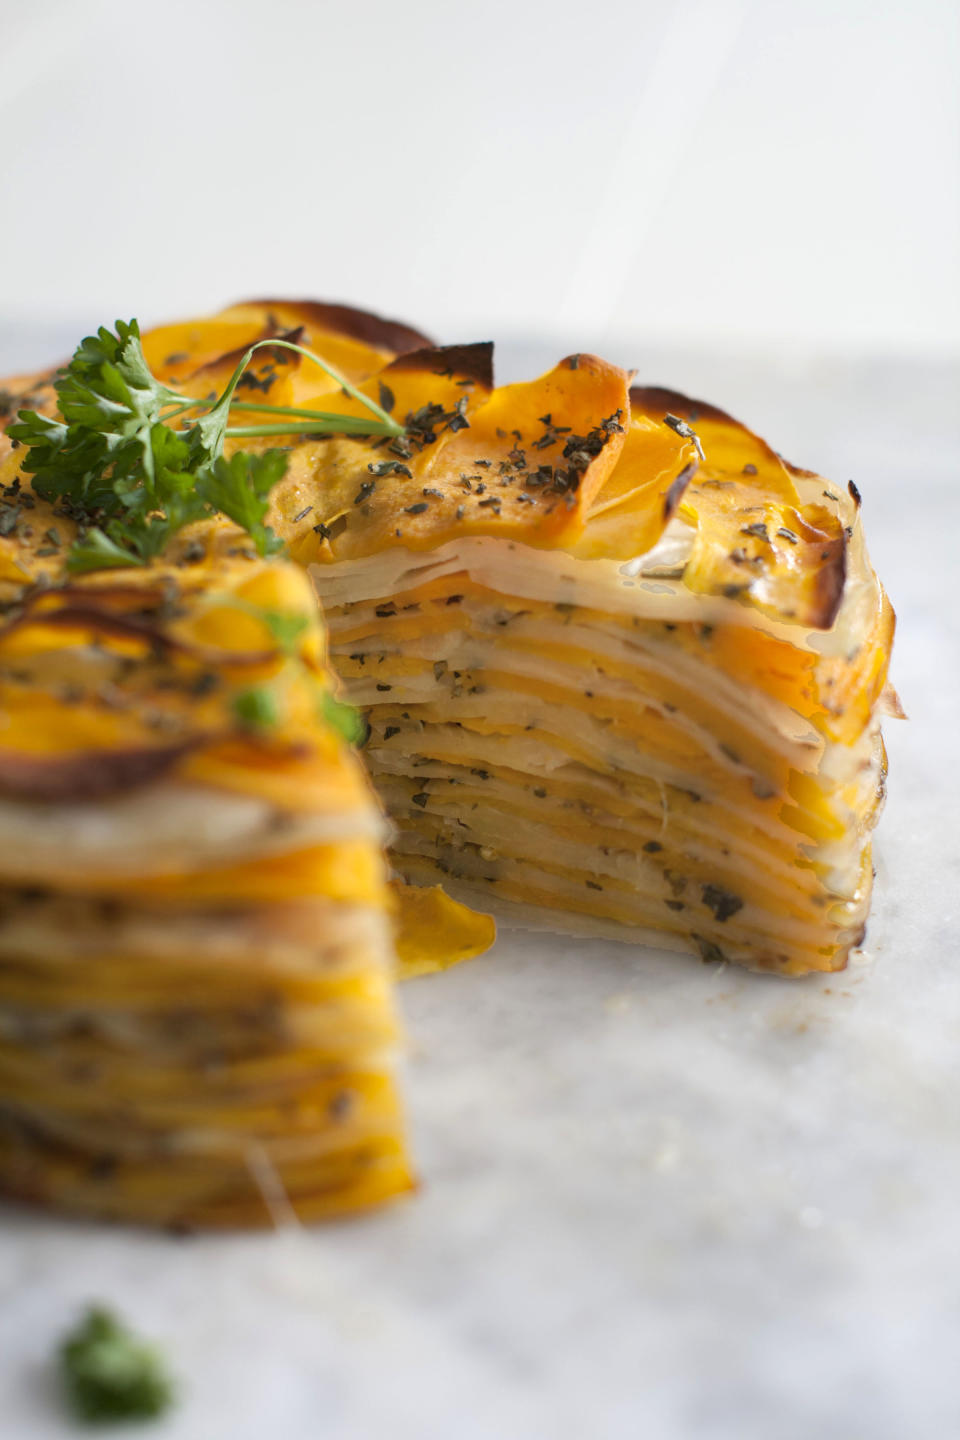 This March 31, 2014 photo shows roasted butternut and herb tart in Concord, N.H. (AP Photo/Matthew Mead)